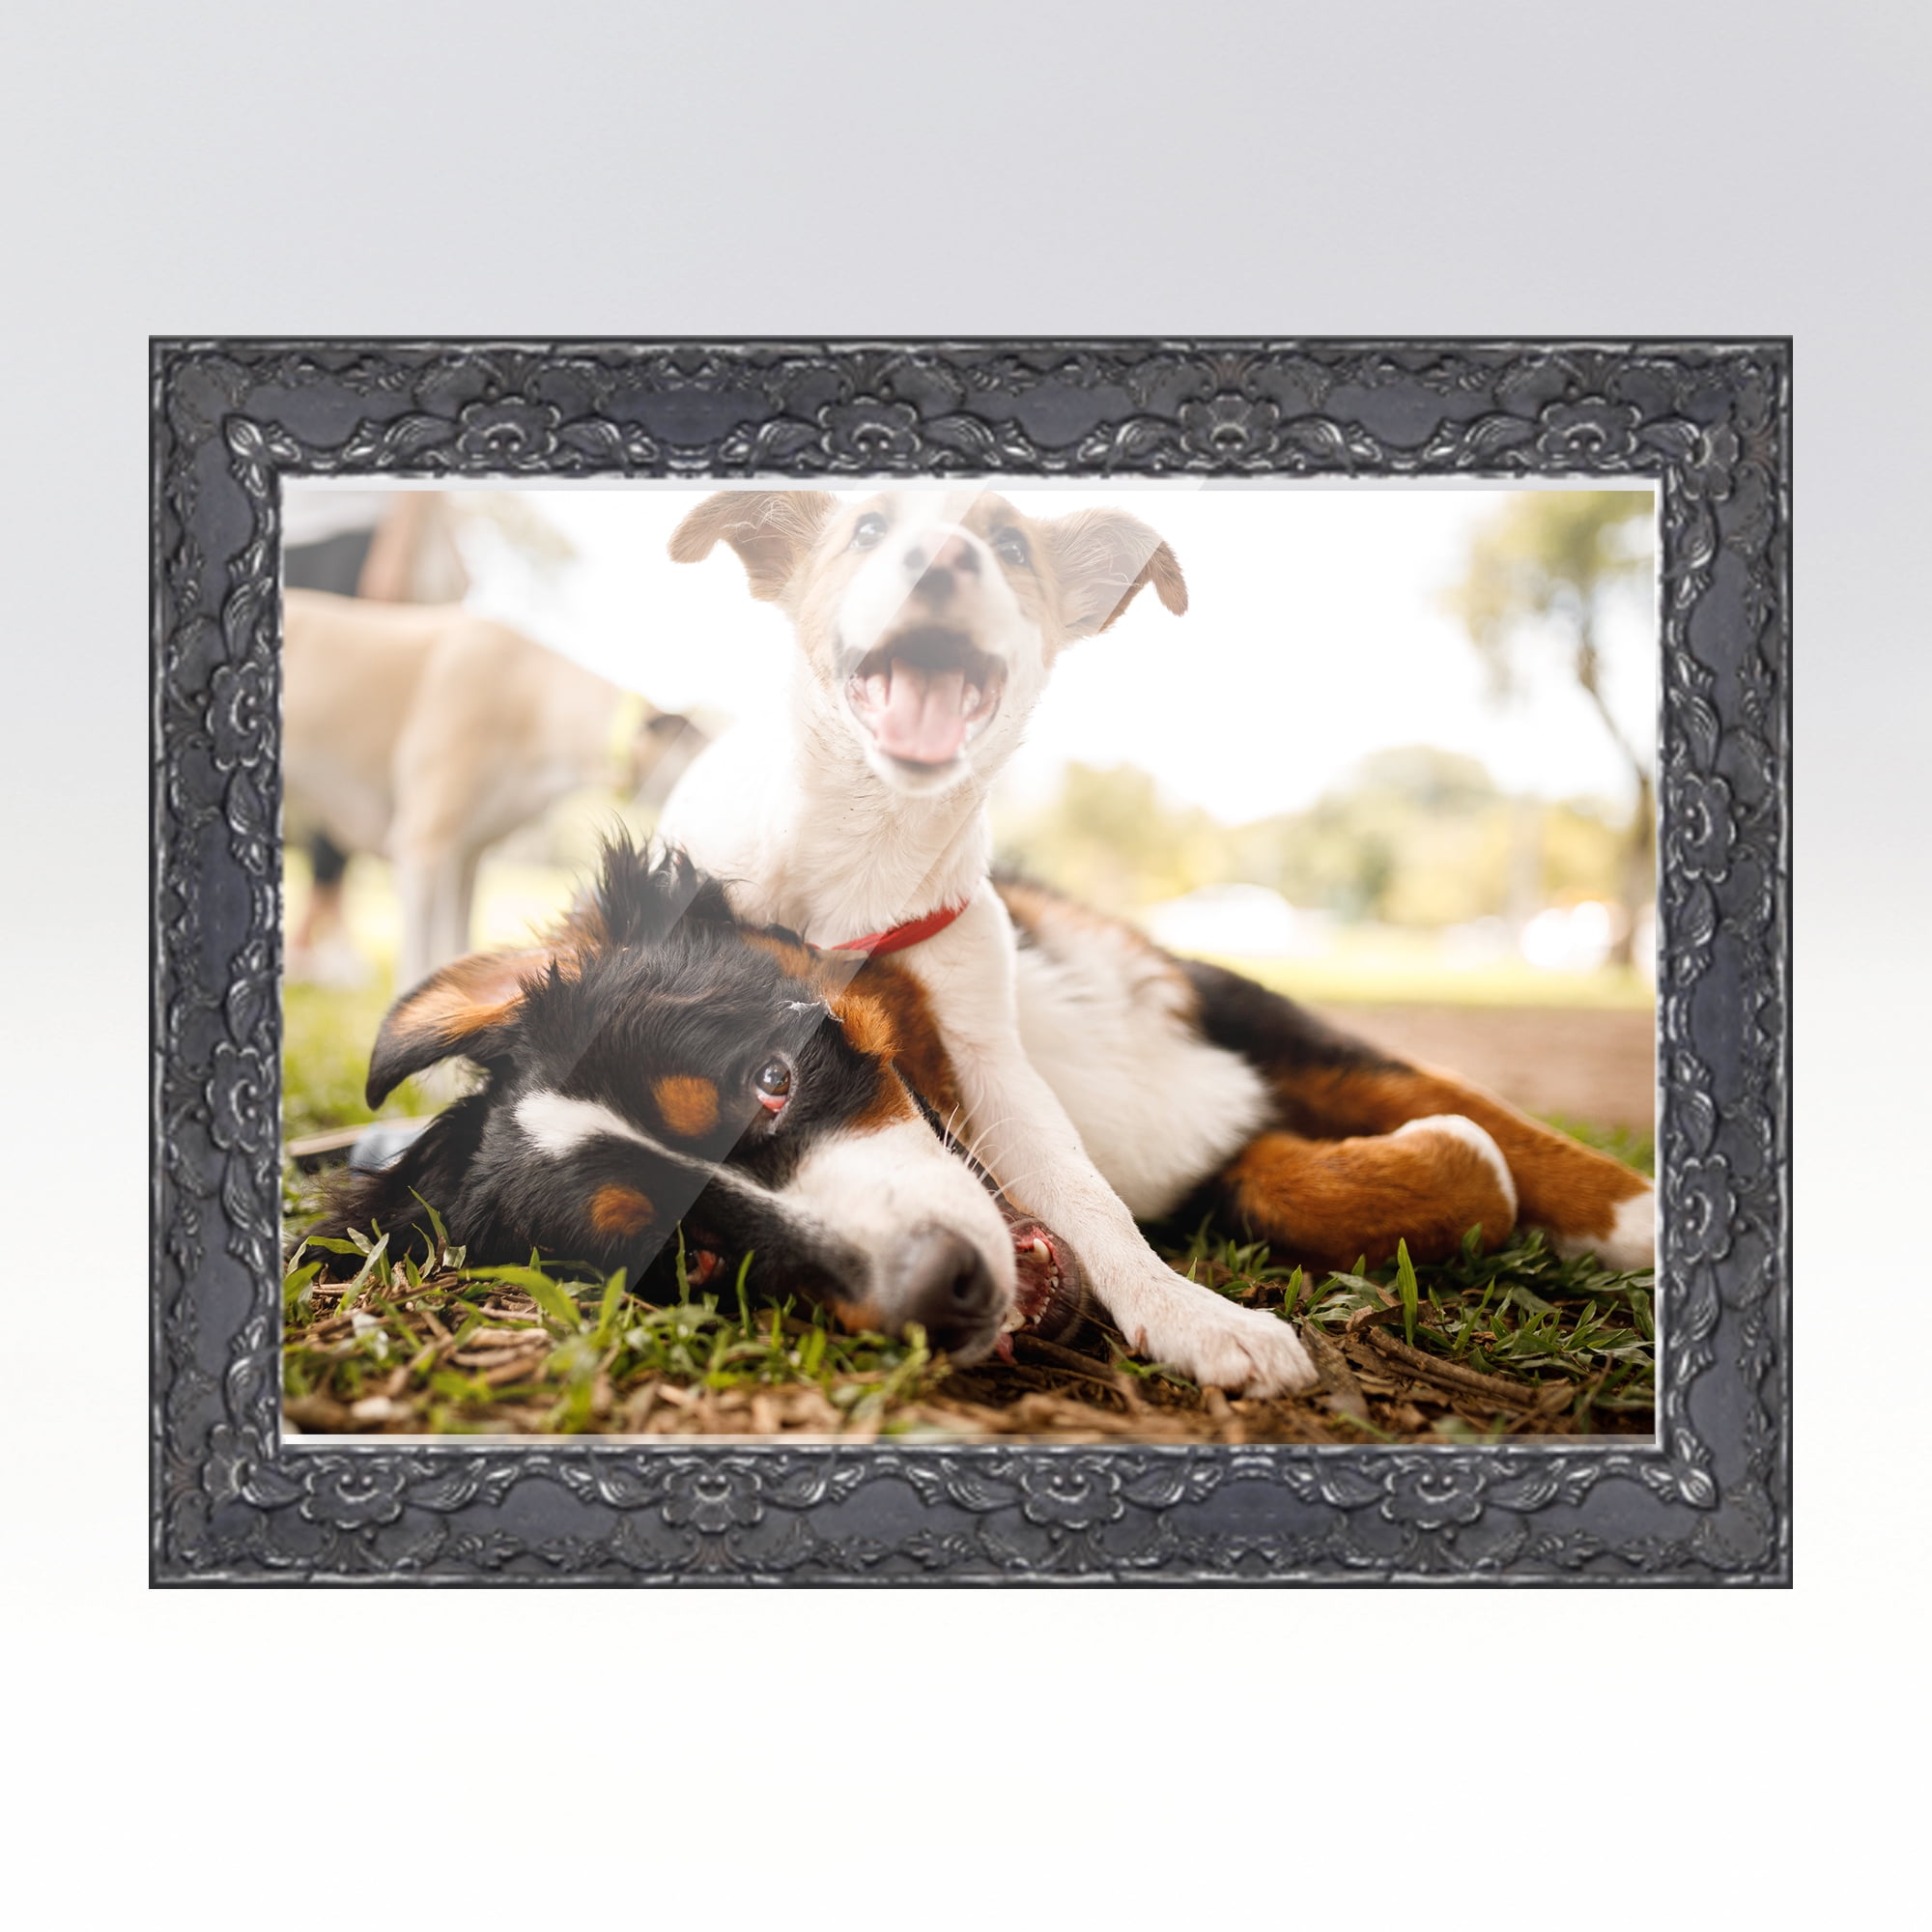 14x6 Frame Silver Real Wood Picture Frame Width 1.75 inches | Interior  Frame Depth 0.5 inches 